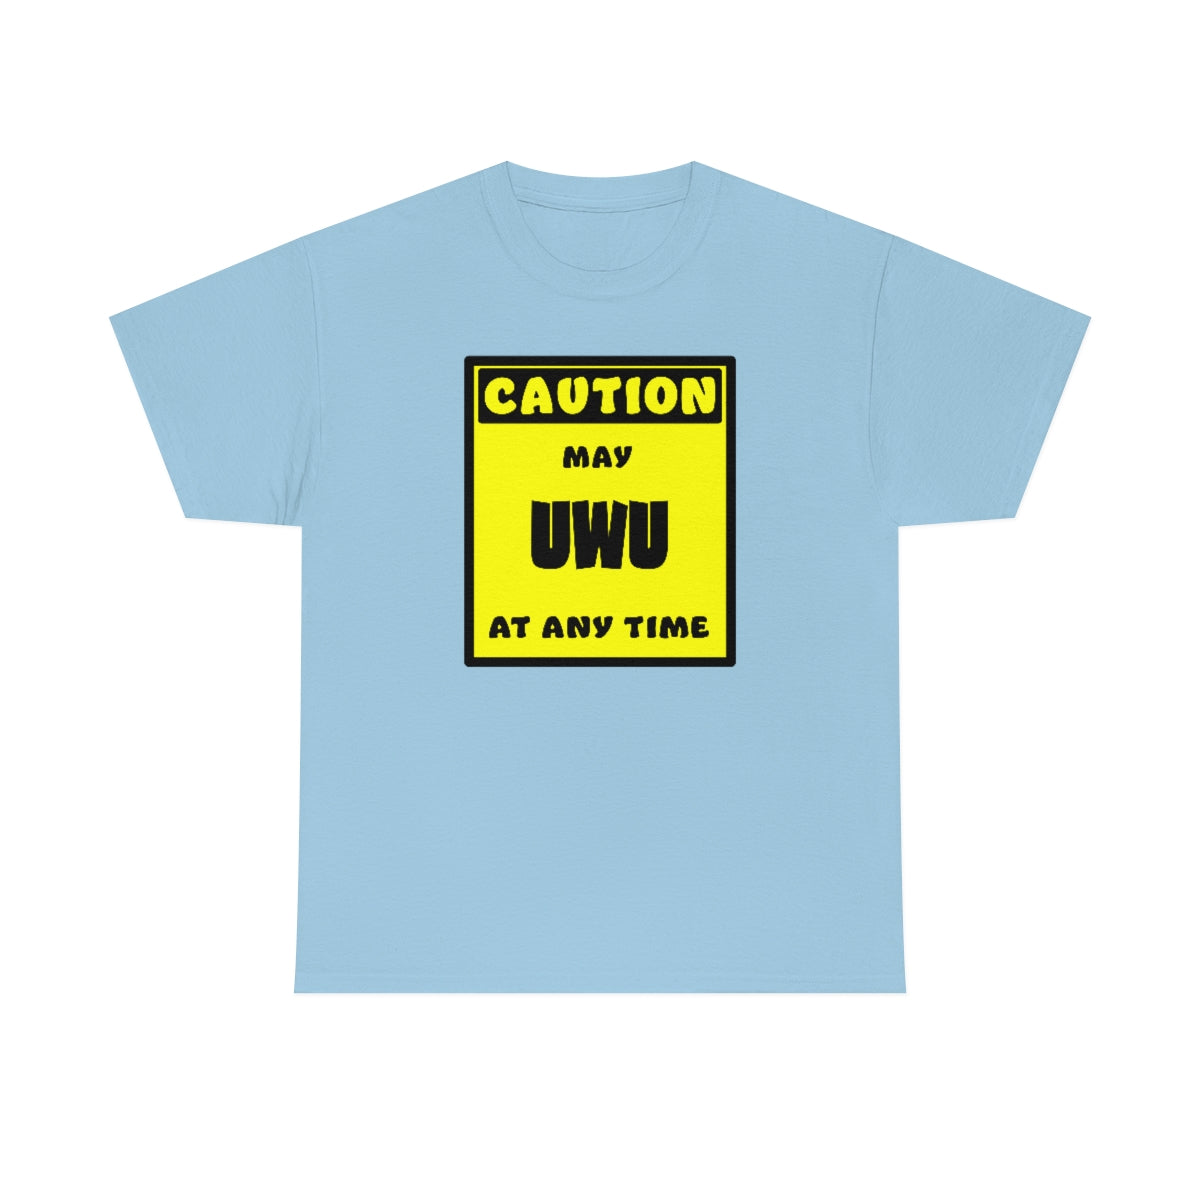 CAUTION! May UWU at any time! - T-Shirt T-Shirt AFLT-Whootorca Light Blue S 